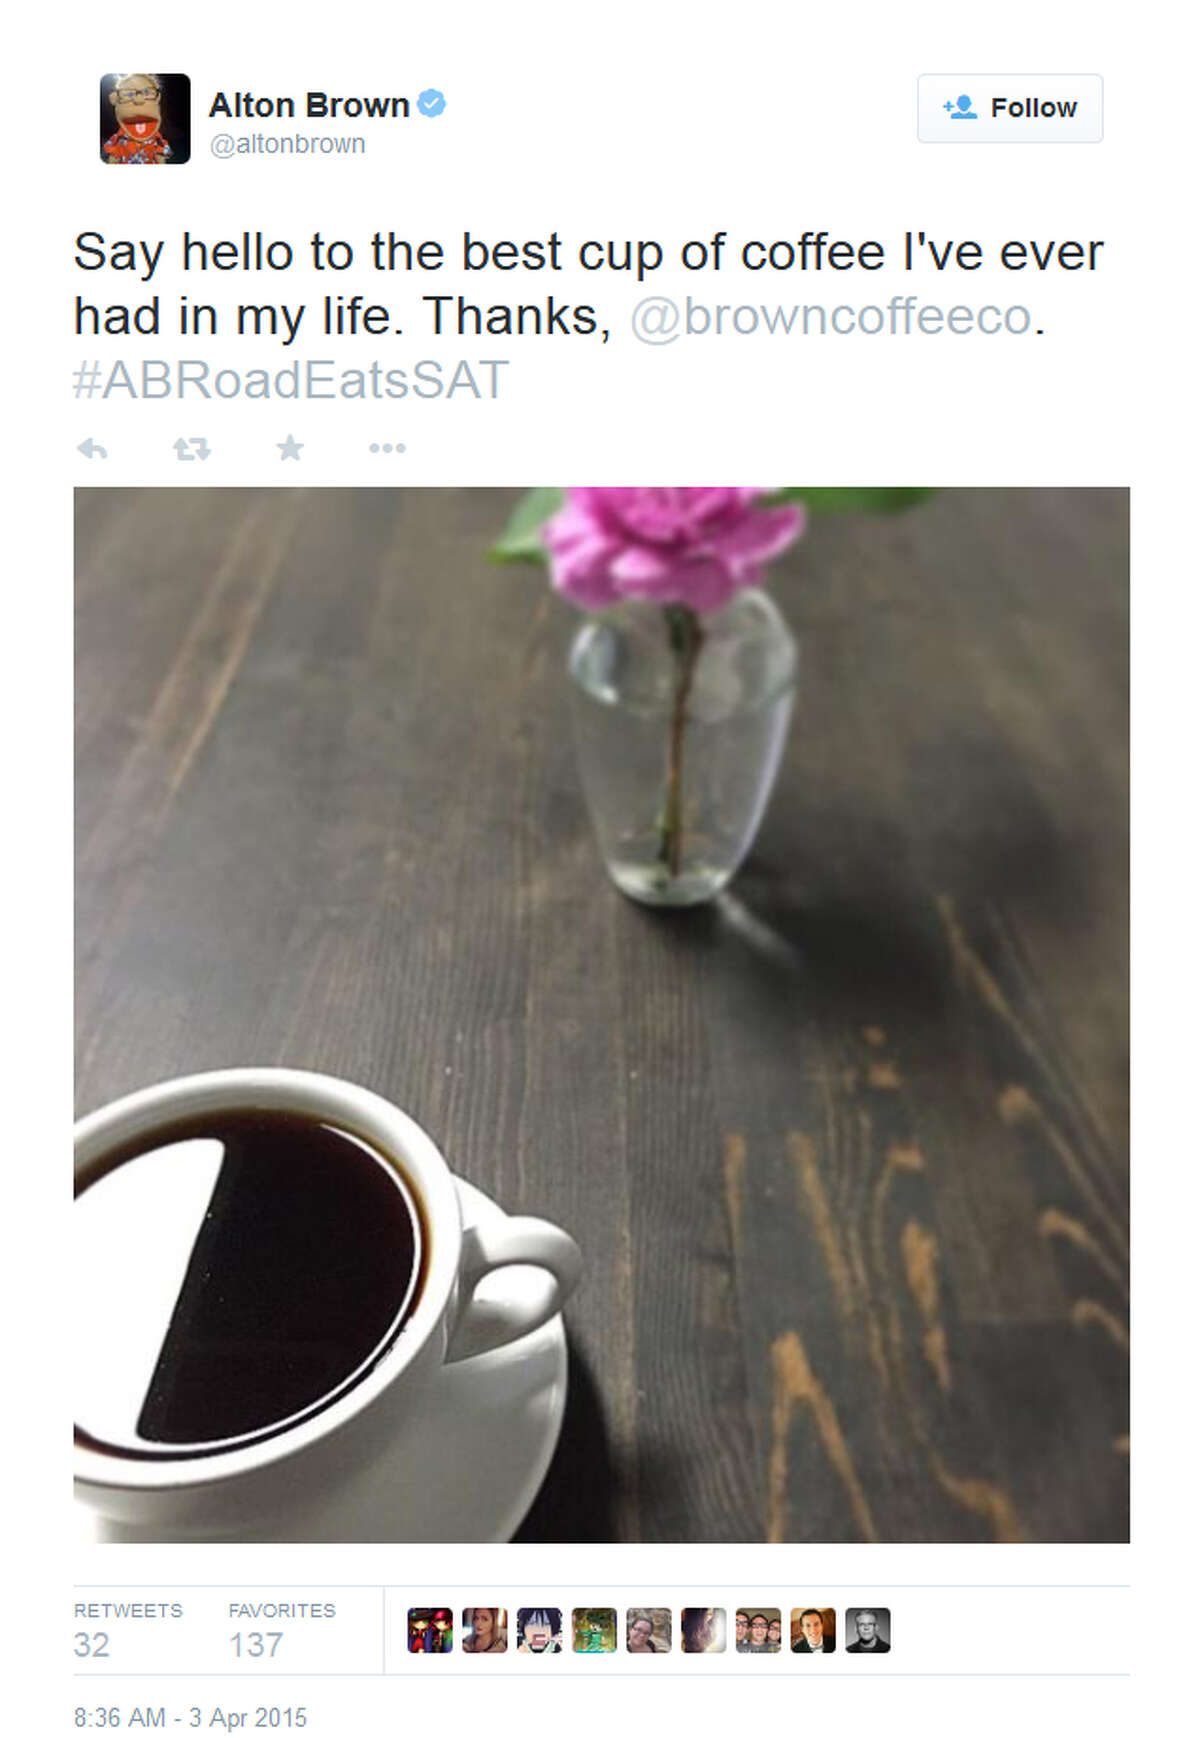 Alton Brown (@altonbrown) tweeted this photo from San Antonio's Brown Coffee Co. Friday morning, April 3, 2015, saying it was "the best cup of coffee I've ever had in my life."